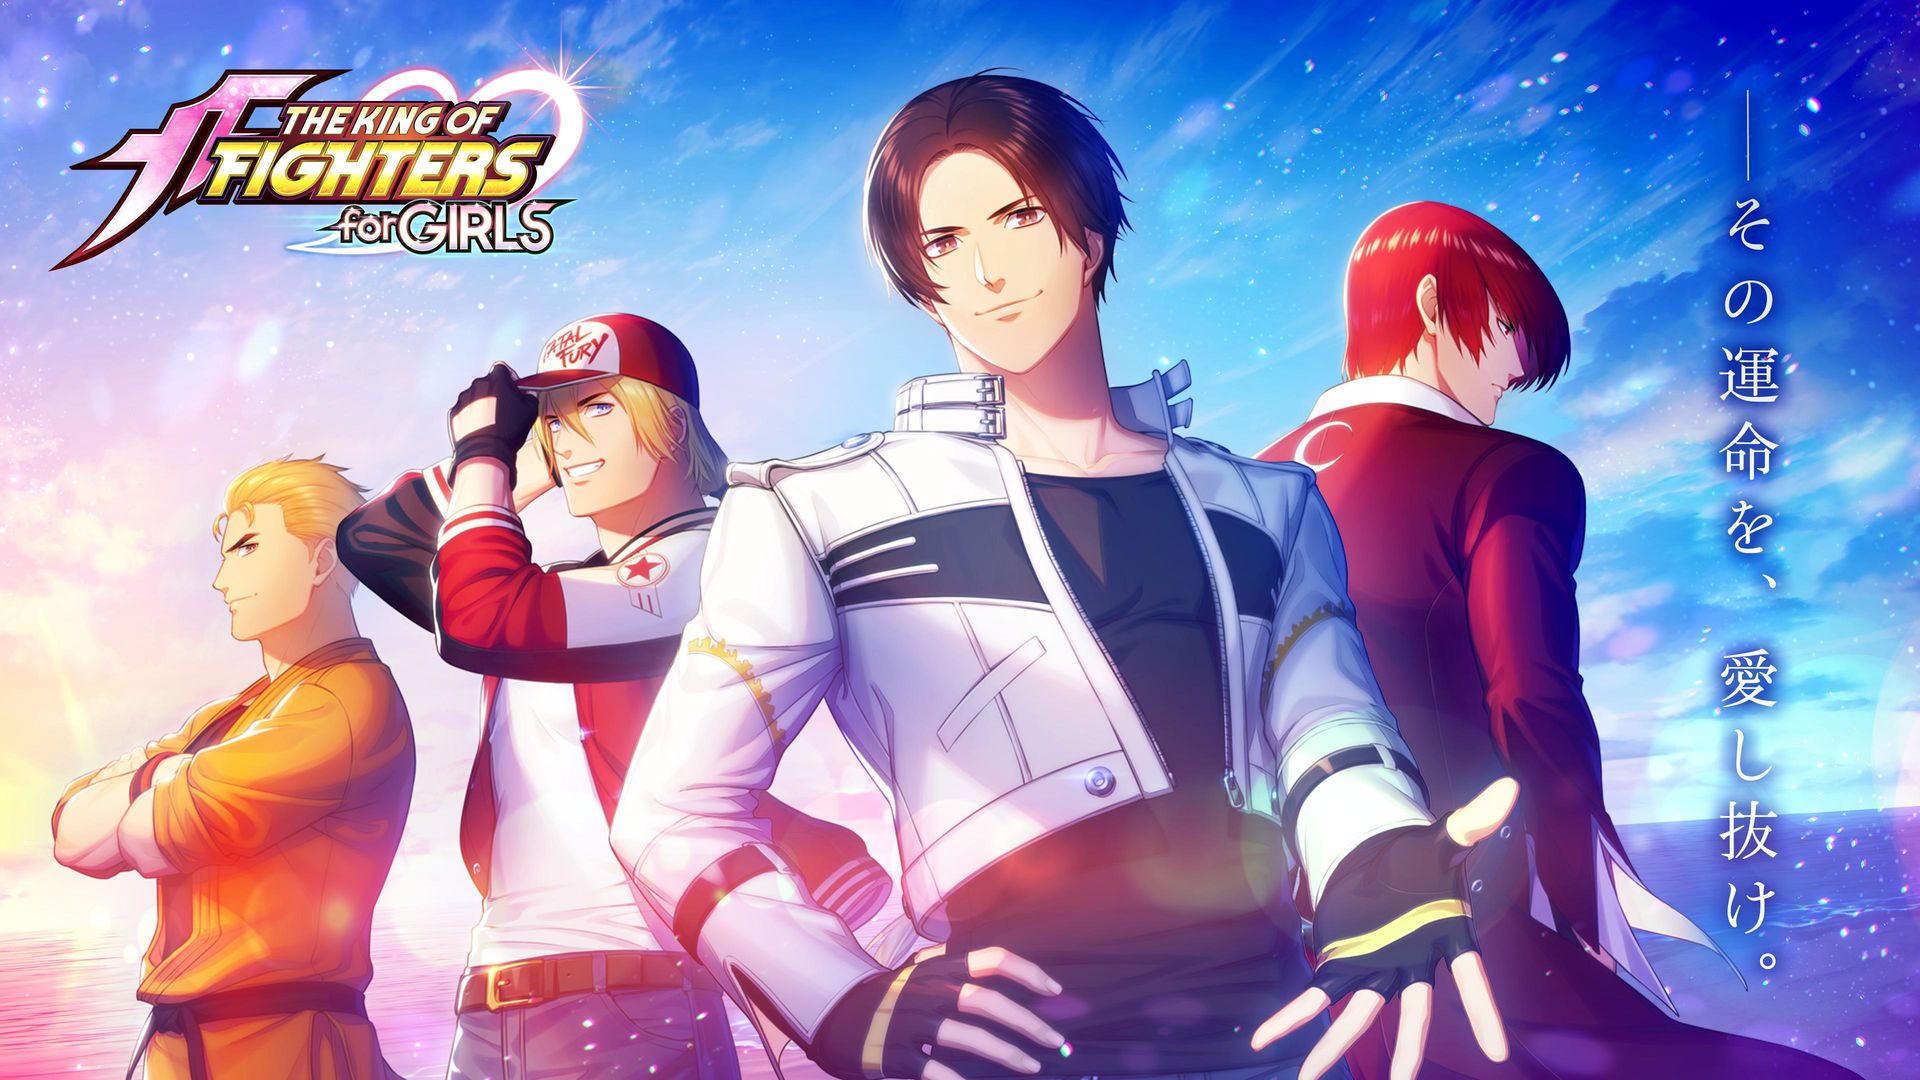 Screenshot of THE KING OF FIGHTERS for GIRLS